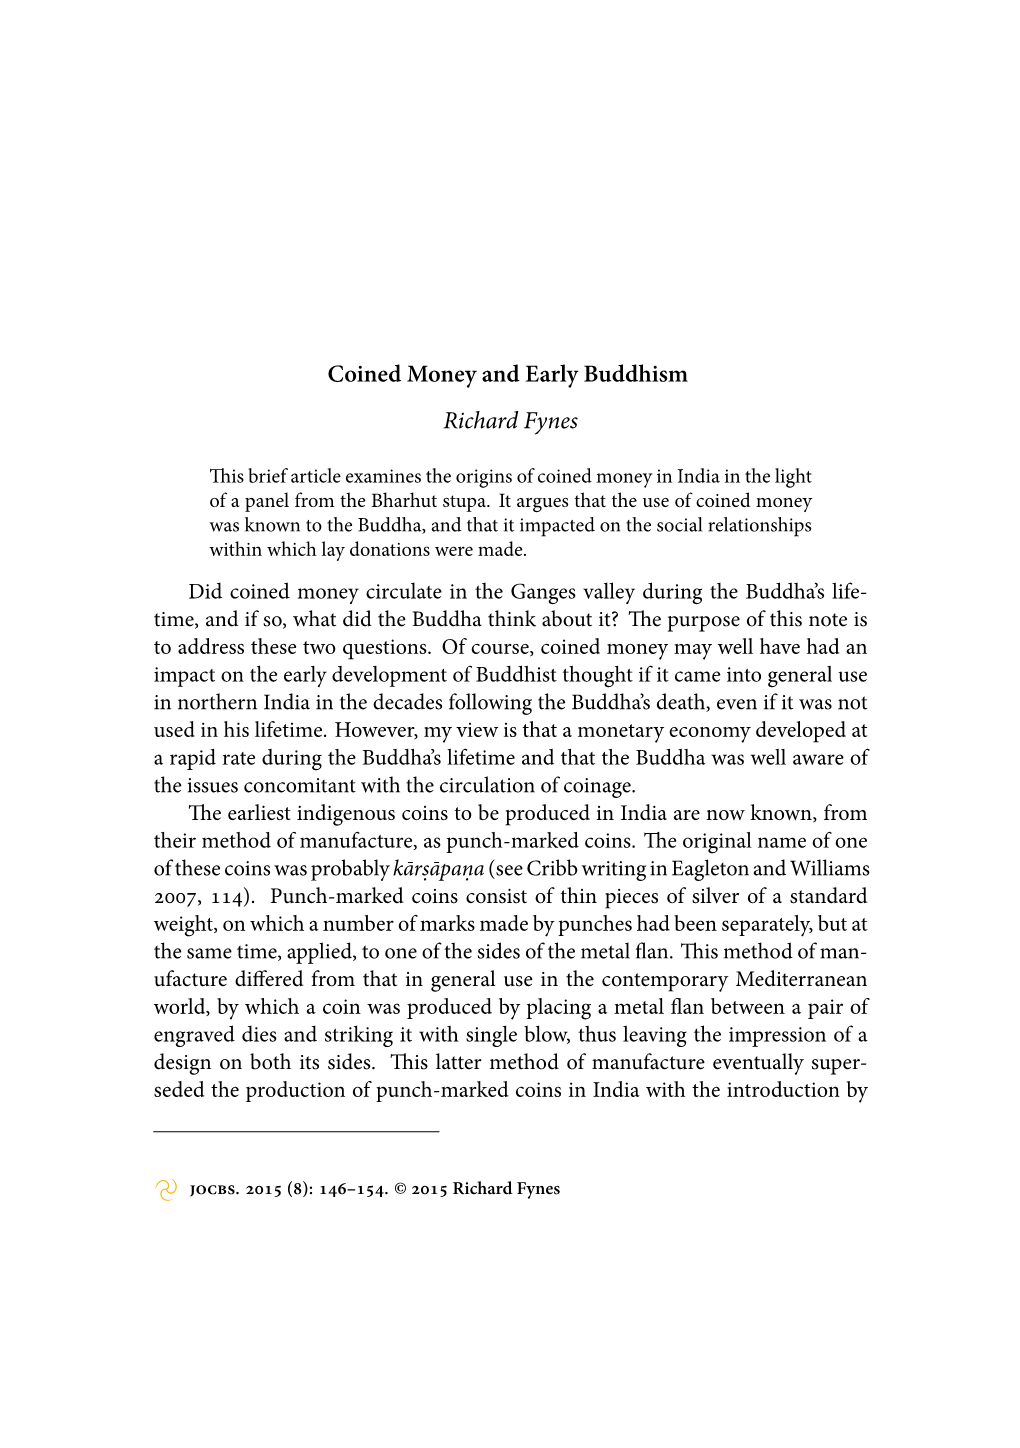 Journal of the Oxford Centre for Buddhist Studies, Vol. 8, May 2015